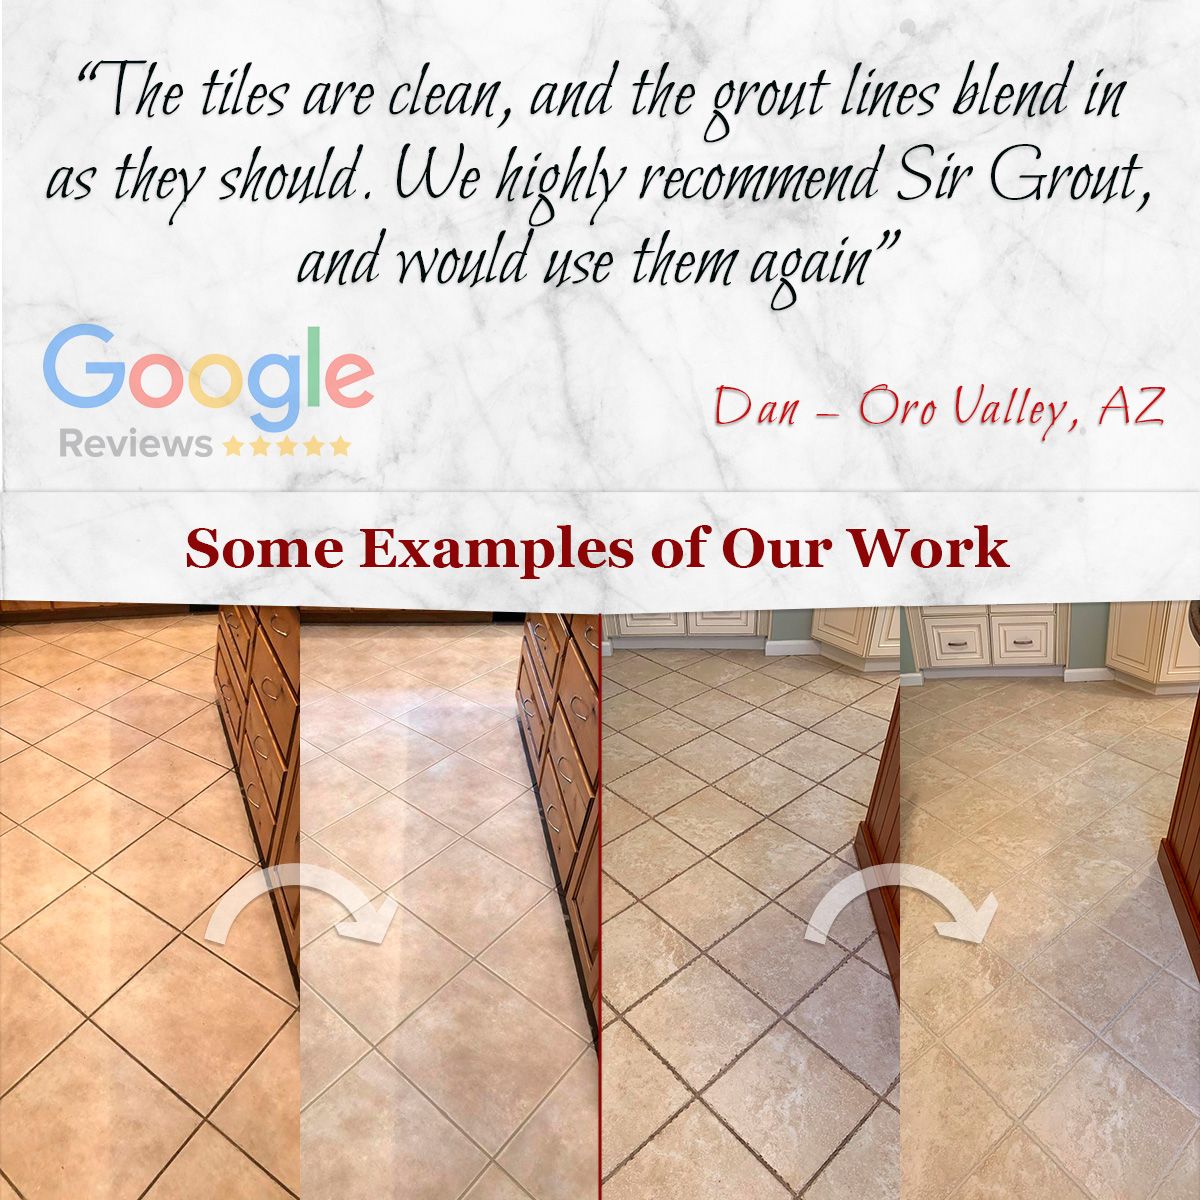 The tiles are clean, and the grout lines blend in as they should. We highly recommend Sir Grout, and would use them again.